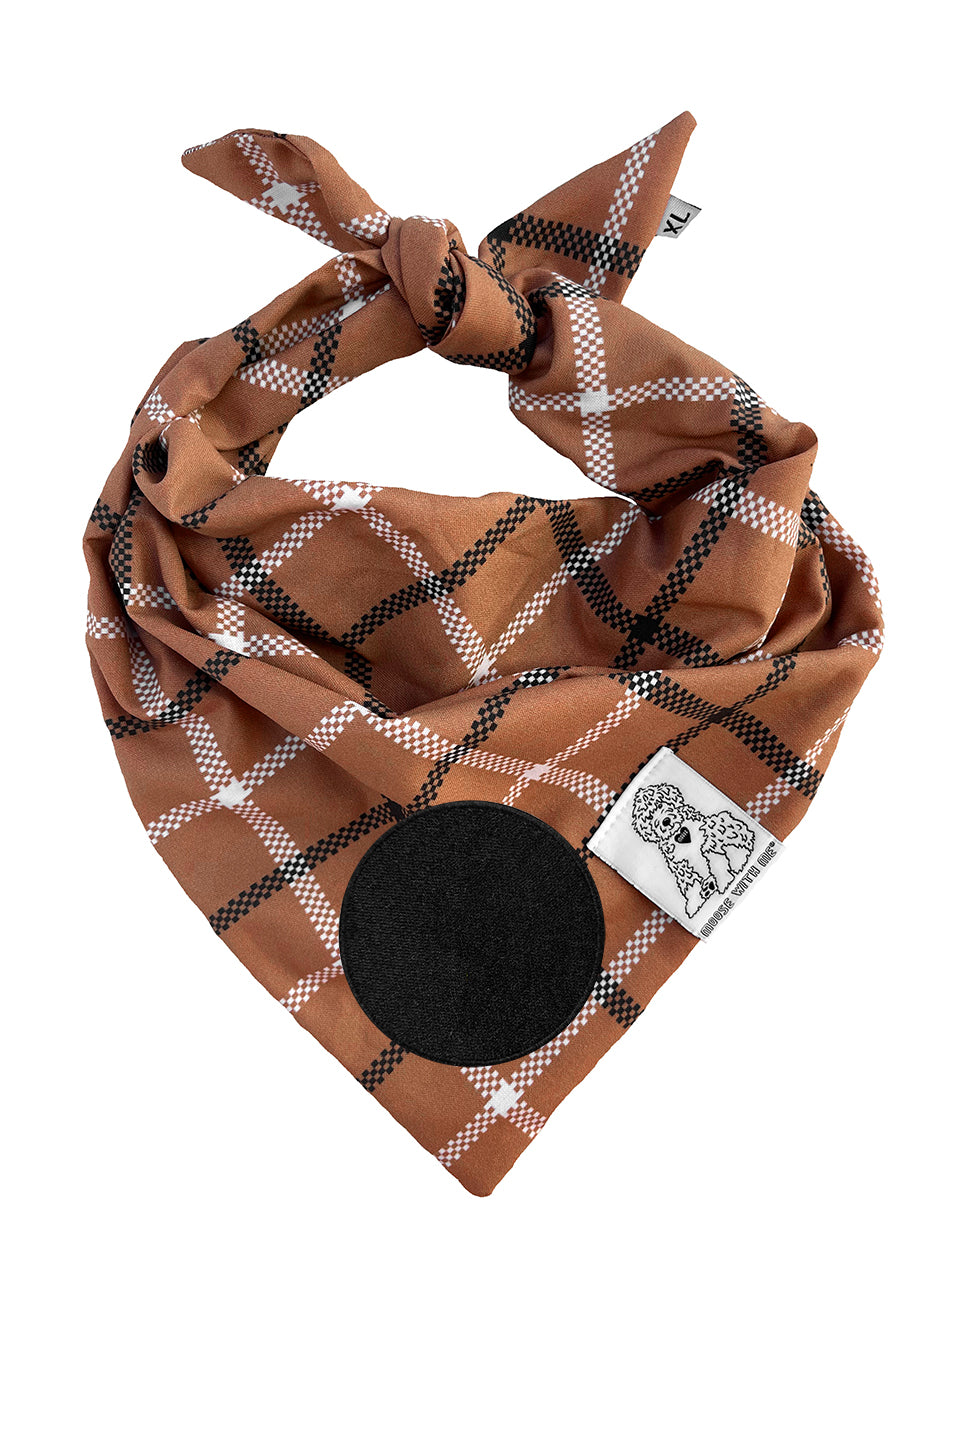 Dog Bandana Plaid - Customize with Interchangeable Velcro Patches